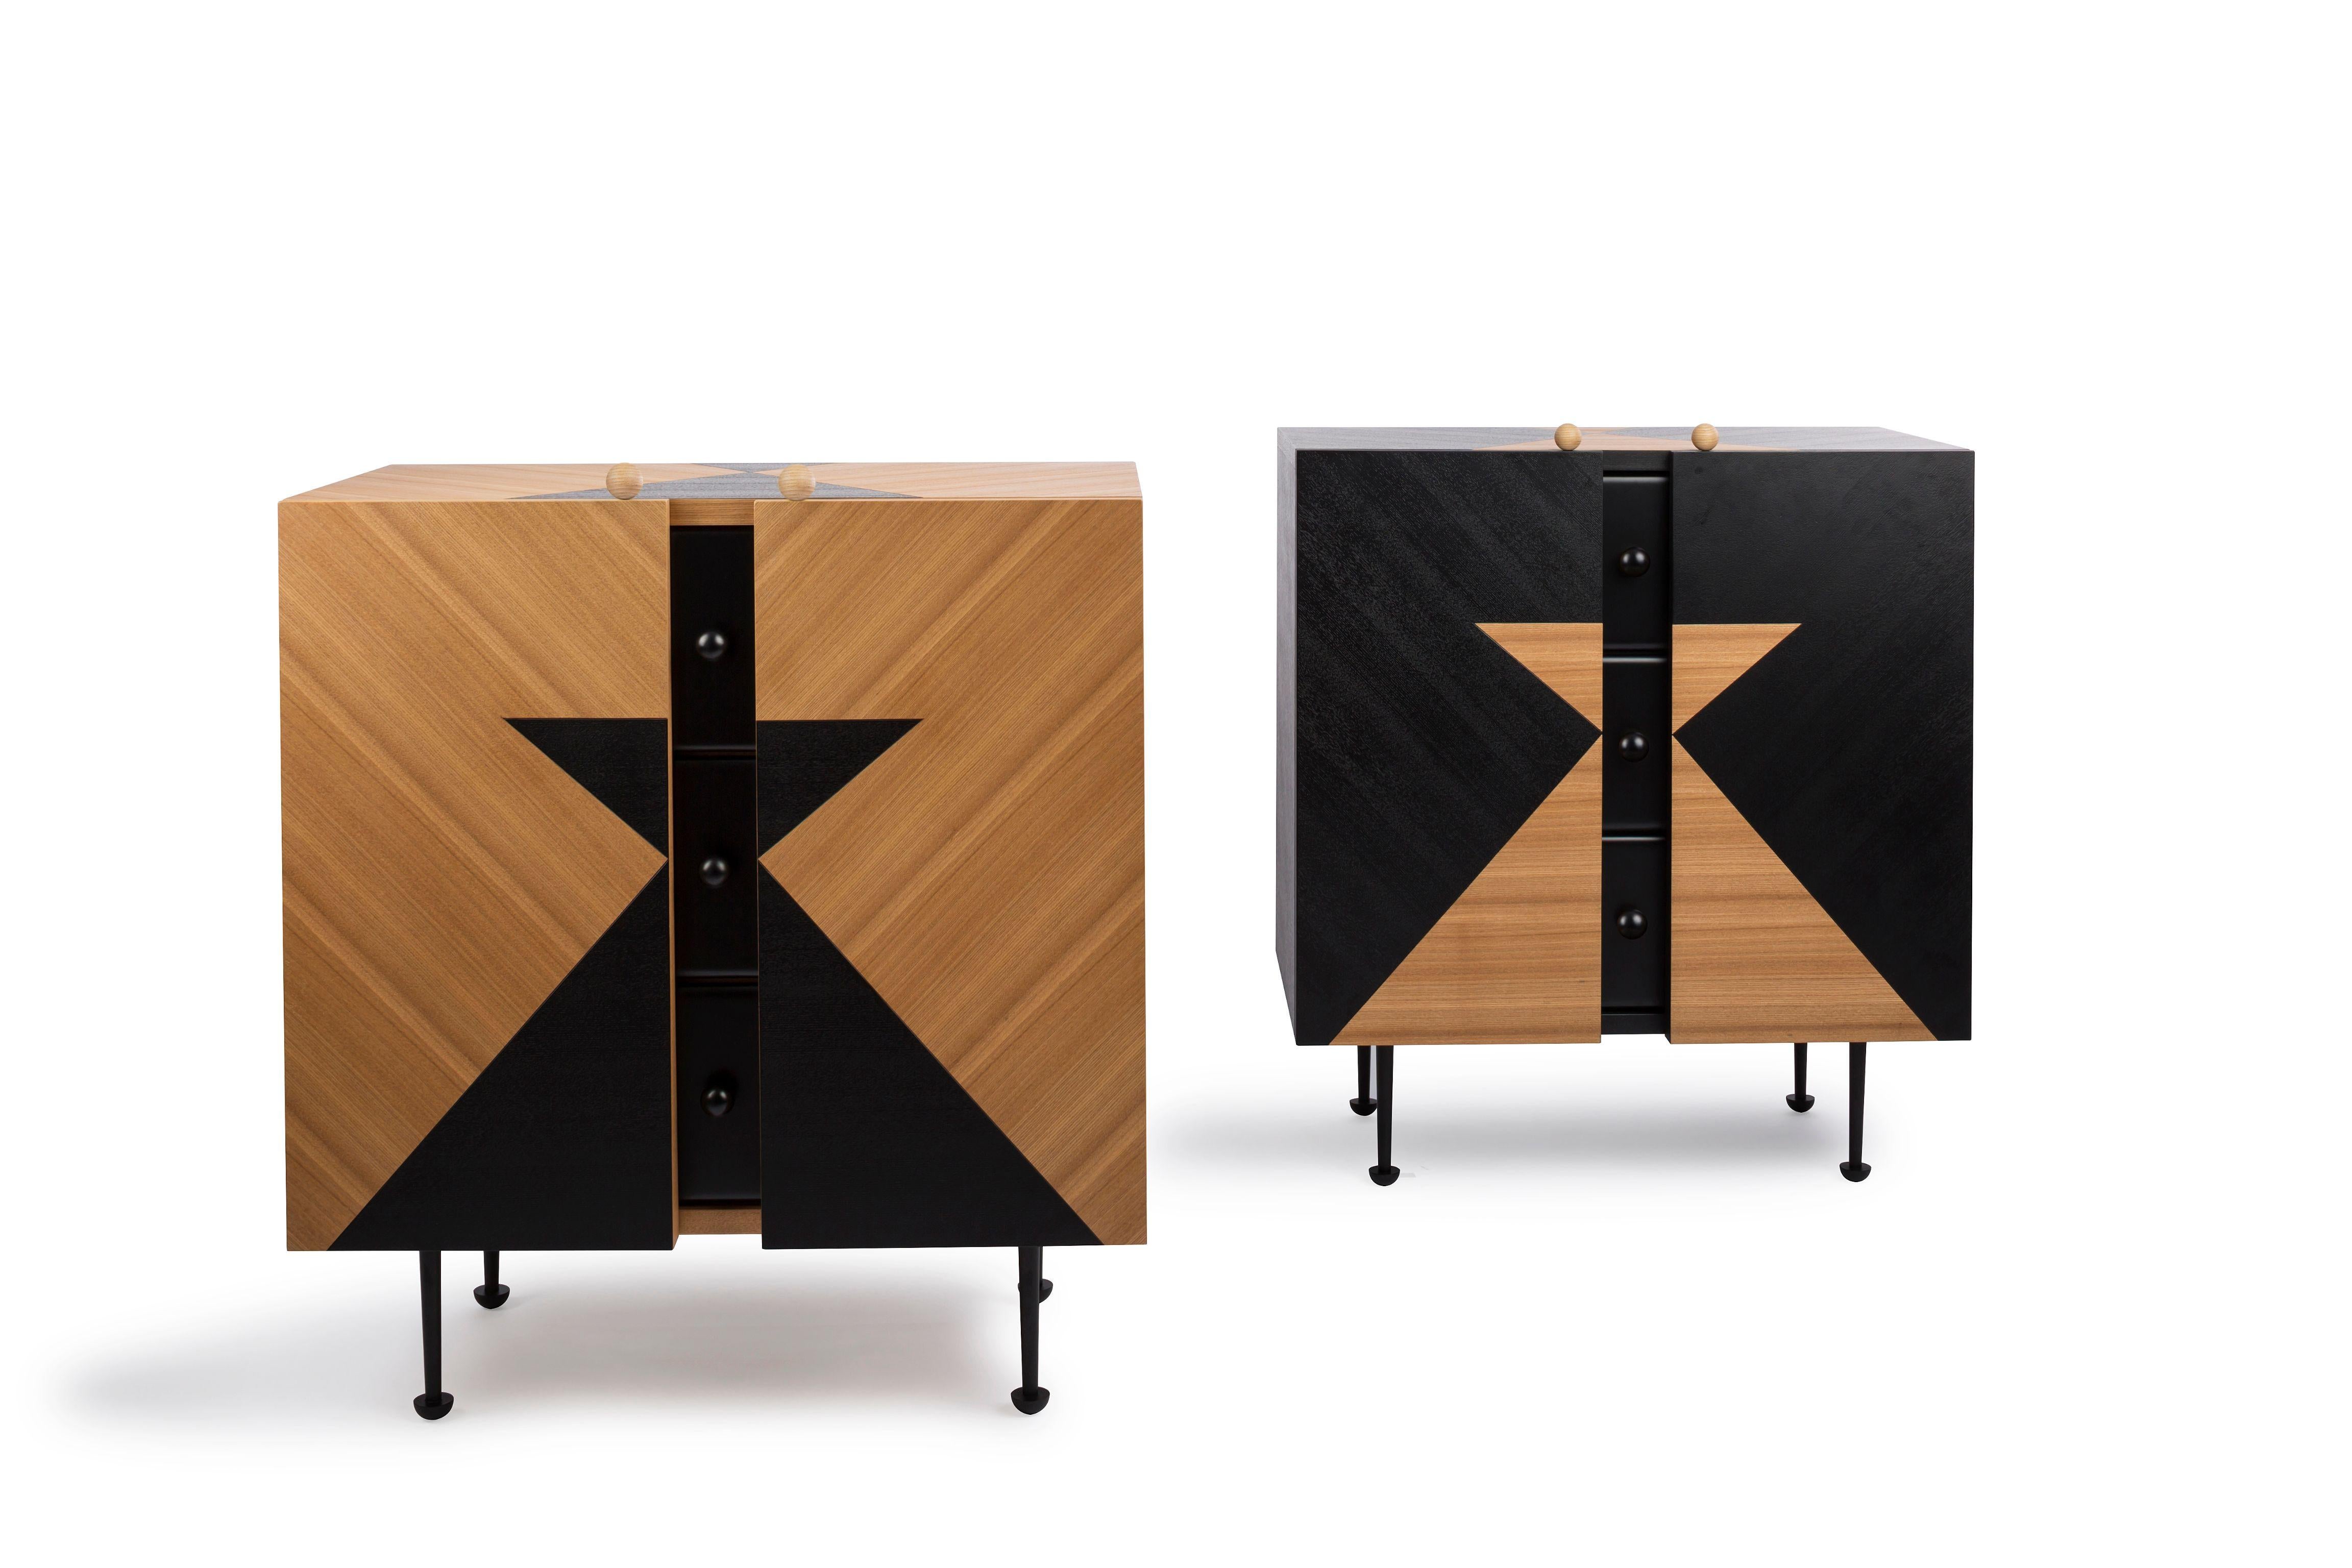 Yin-Yang chest drawers designed by Thomas Dariel, Maison Dada
Measures: W 80 x D 47 x H 93 cm
Body in painted and natural ash veneer • front in matte paint ?nish
Structure in MDF • Inside drawers painted in black matte ?nish
Metal legs with